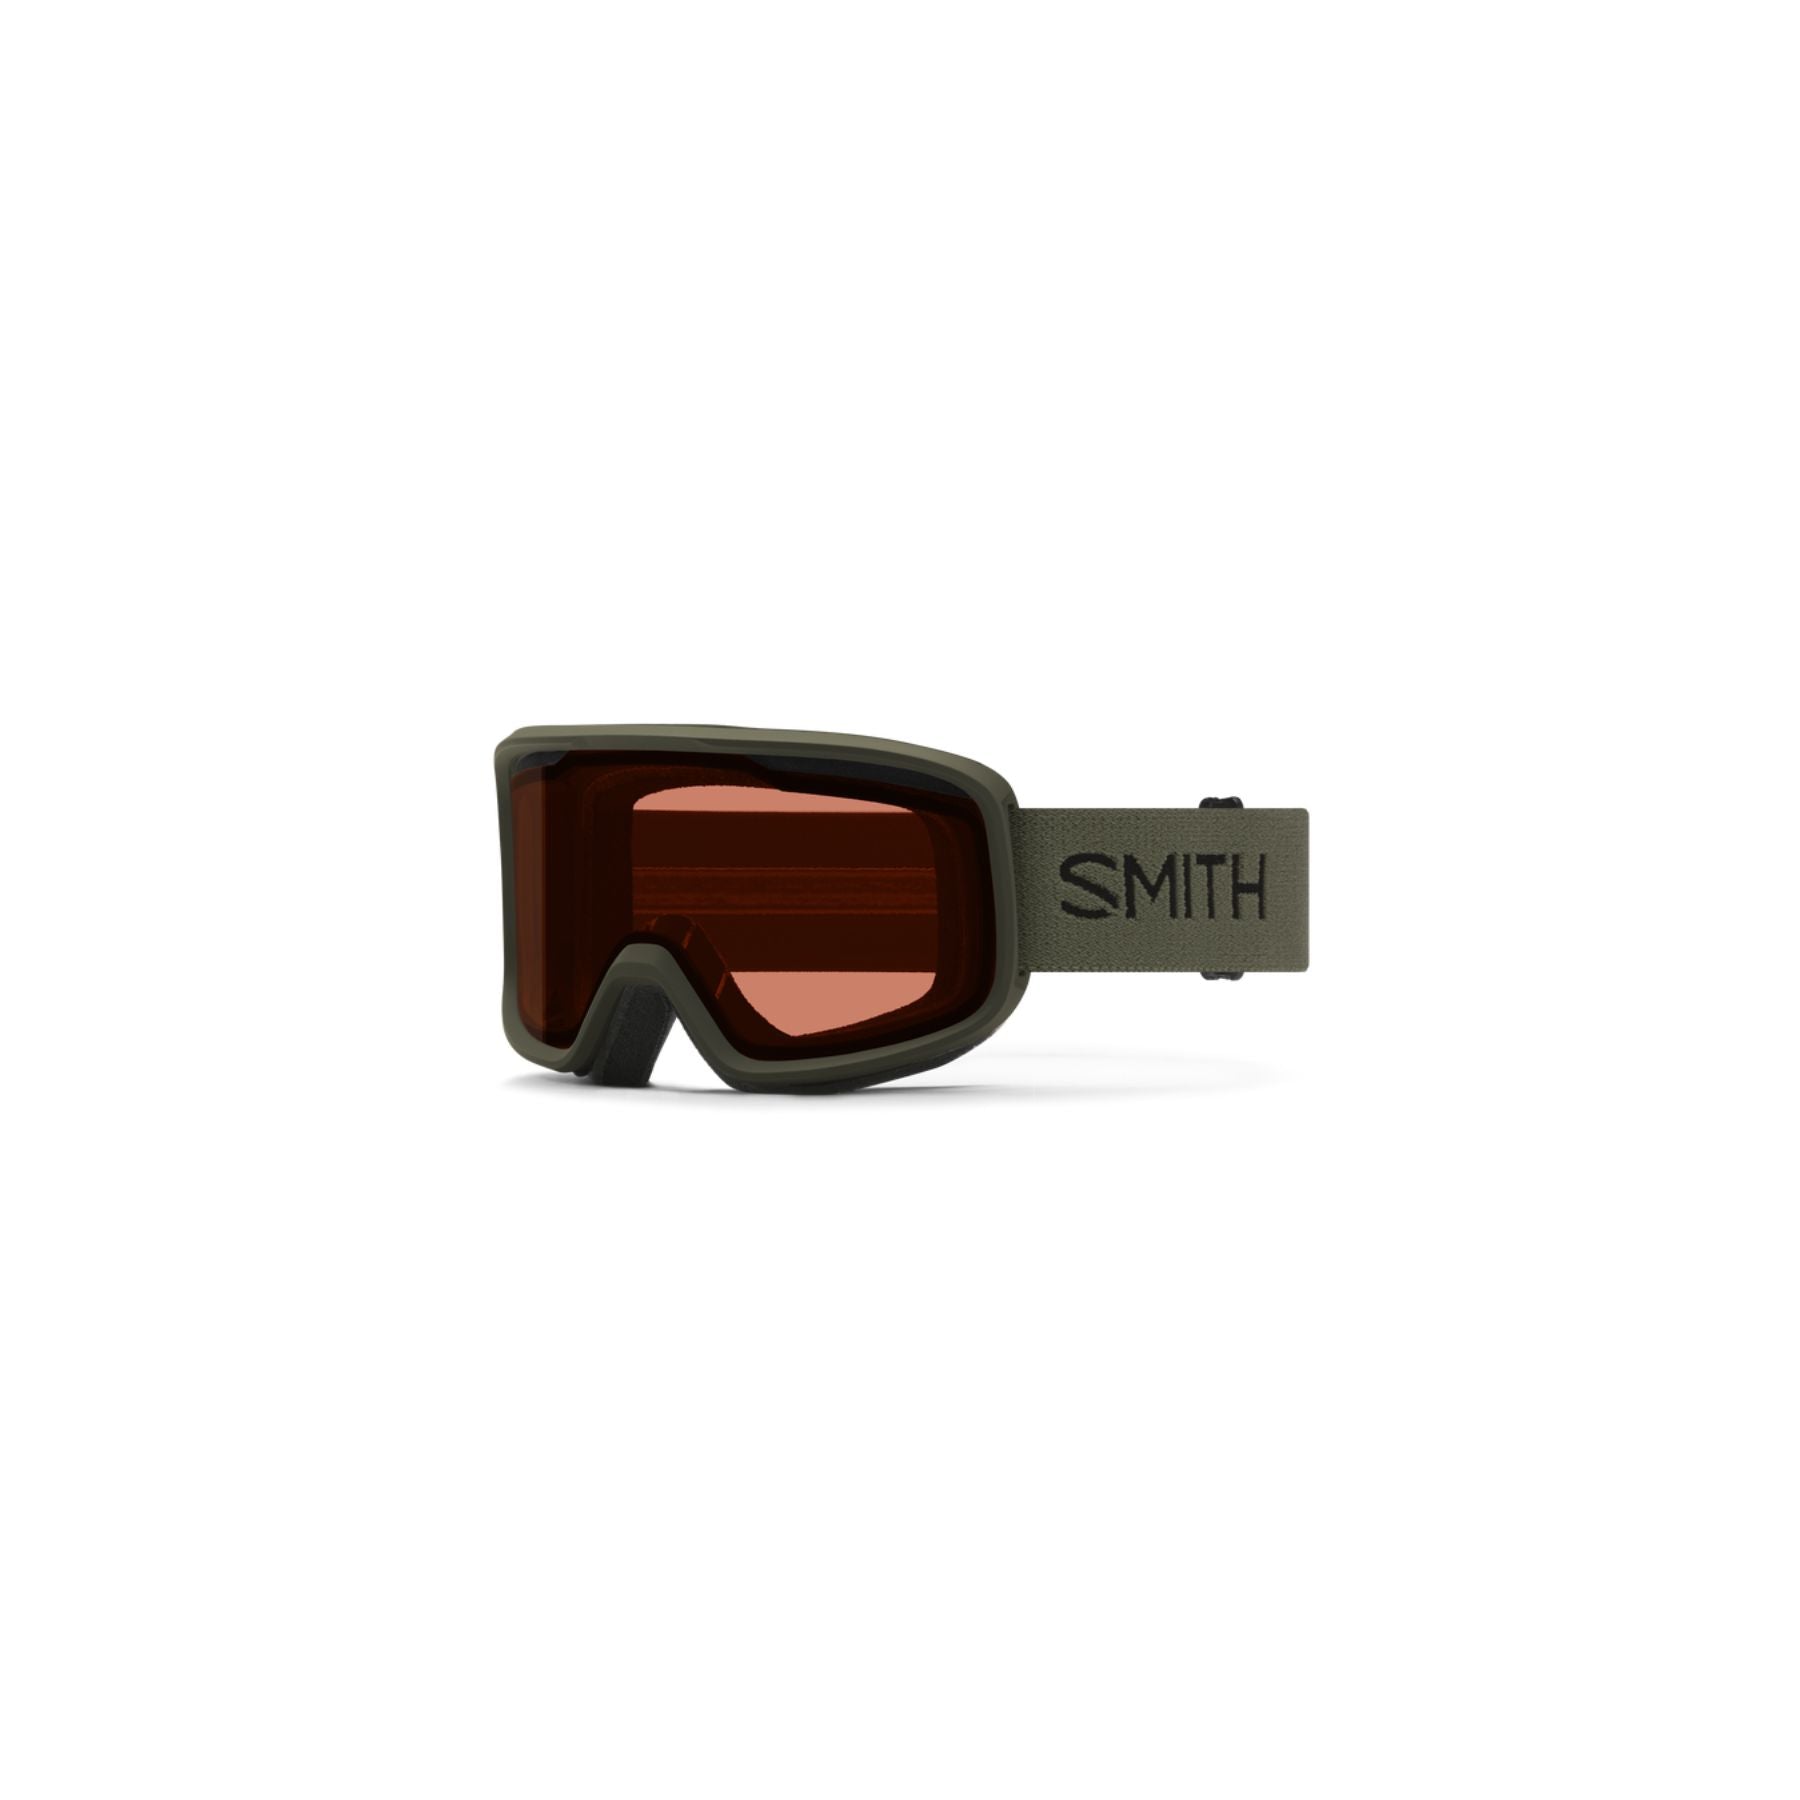 Smith Frontier Goggles in Forest